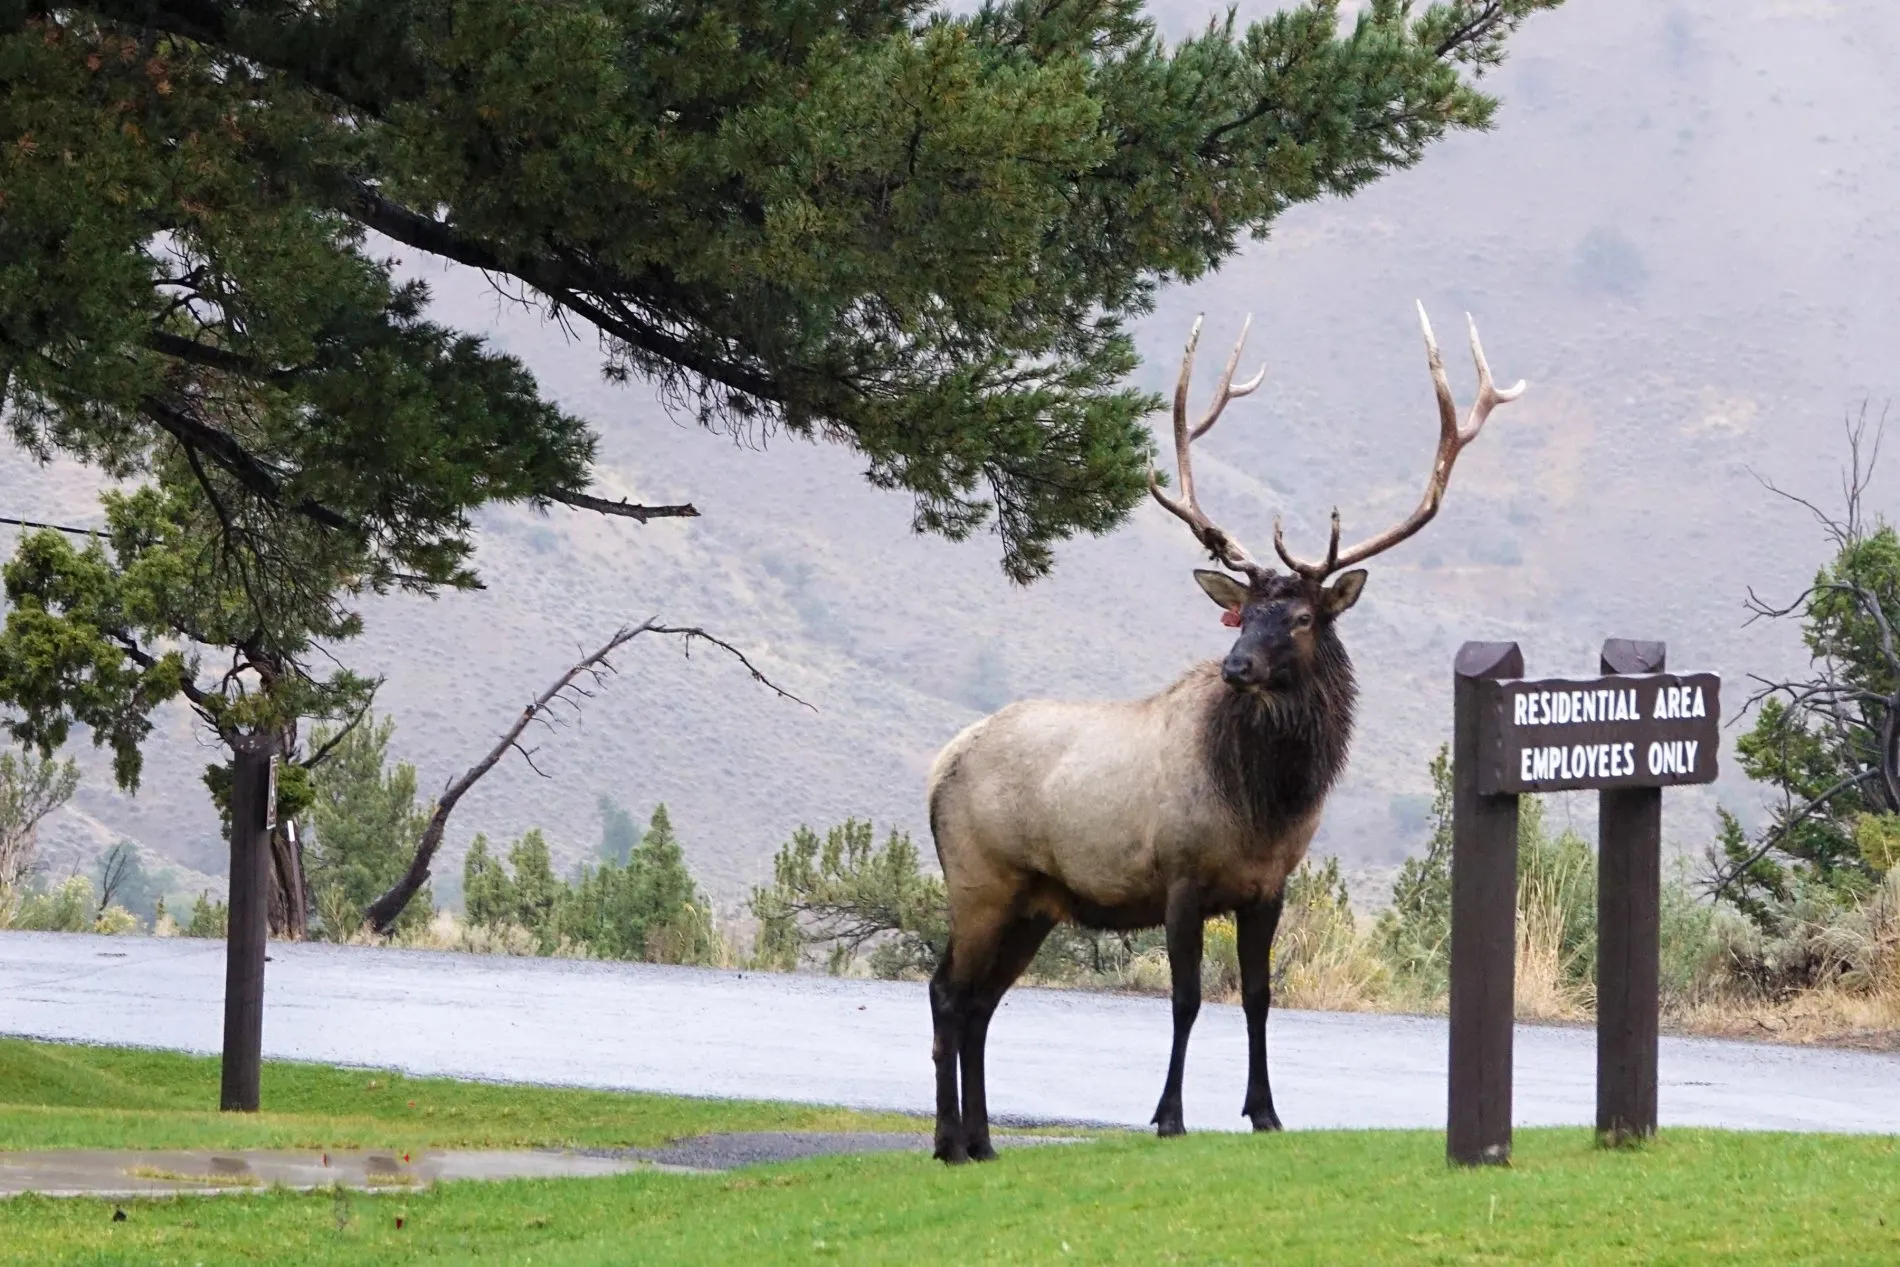 An elk with huge antlers stands next to an “employees only” sign in Mammoth Hot Springs in Yellowstone.